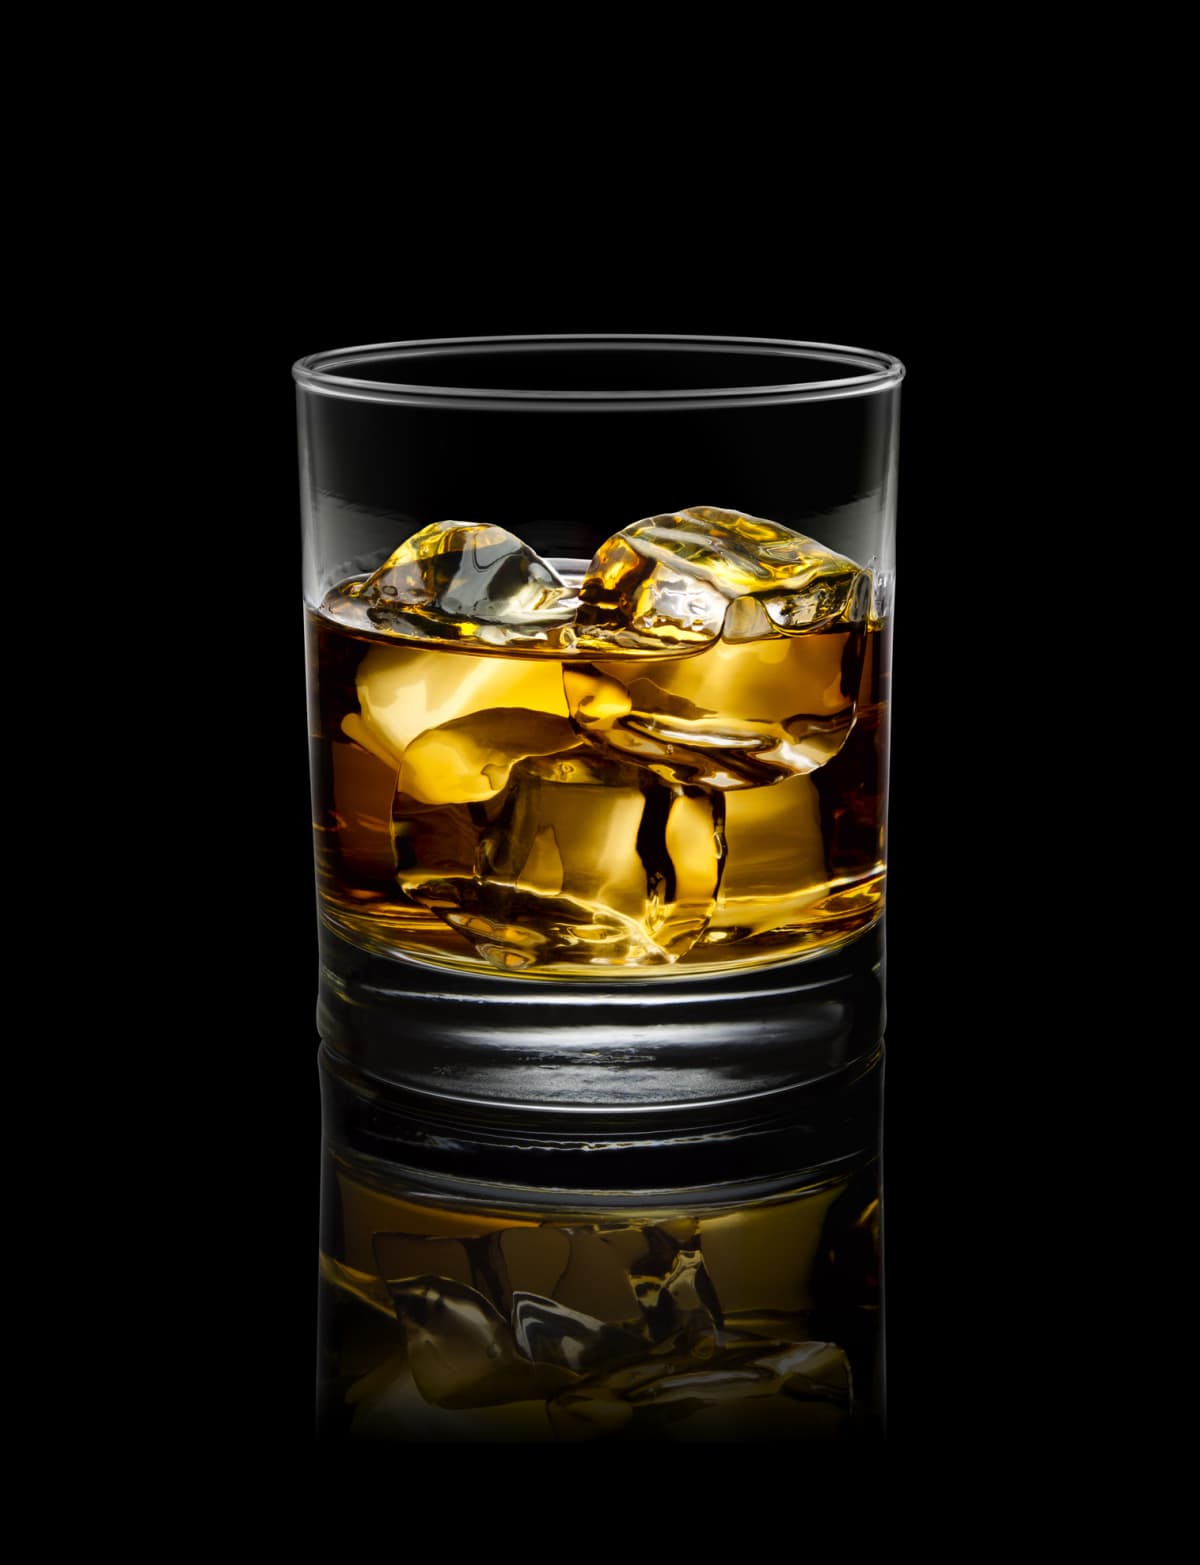  glass of whisky with ice, in a dark background.